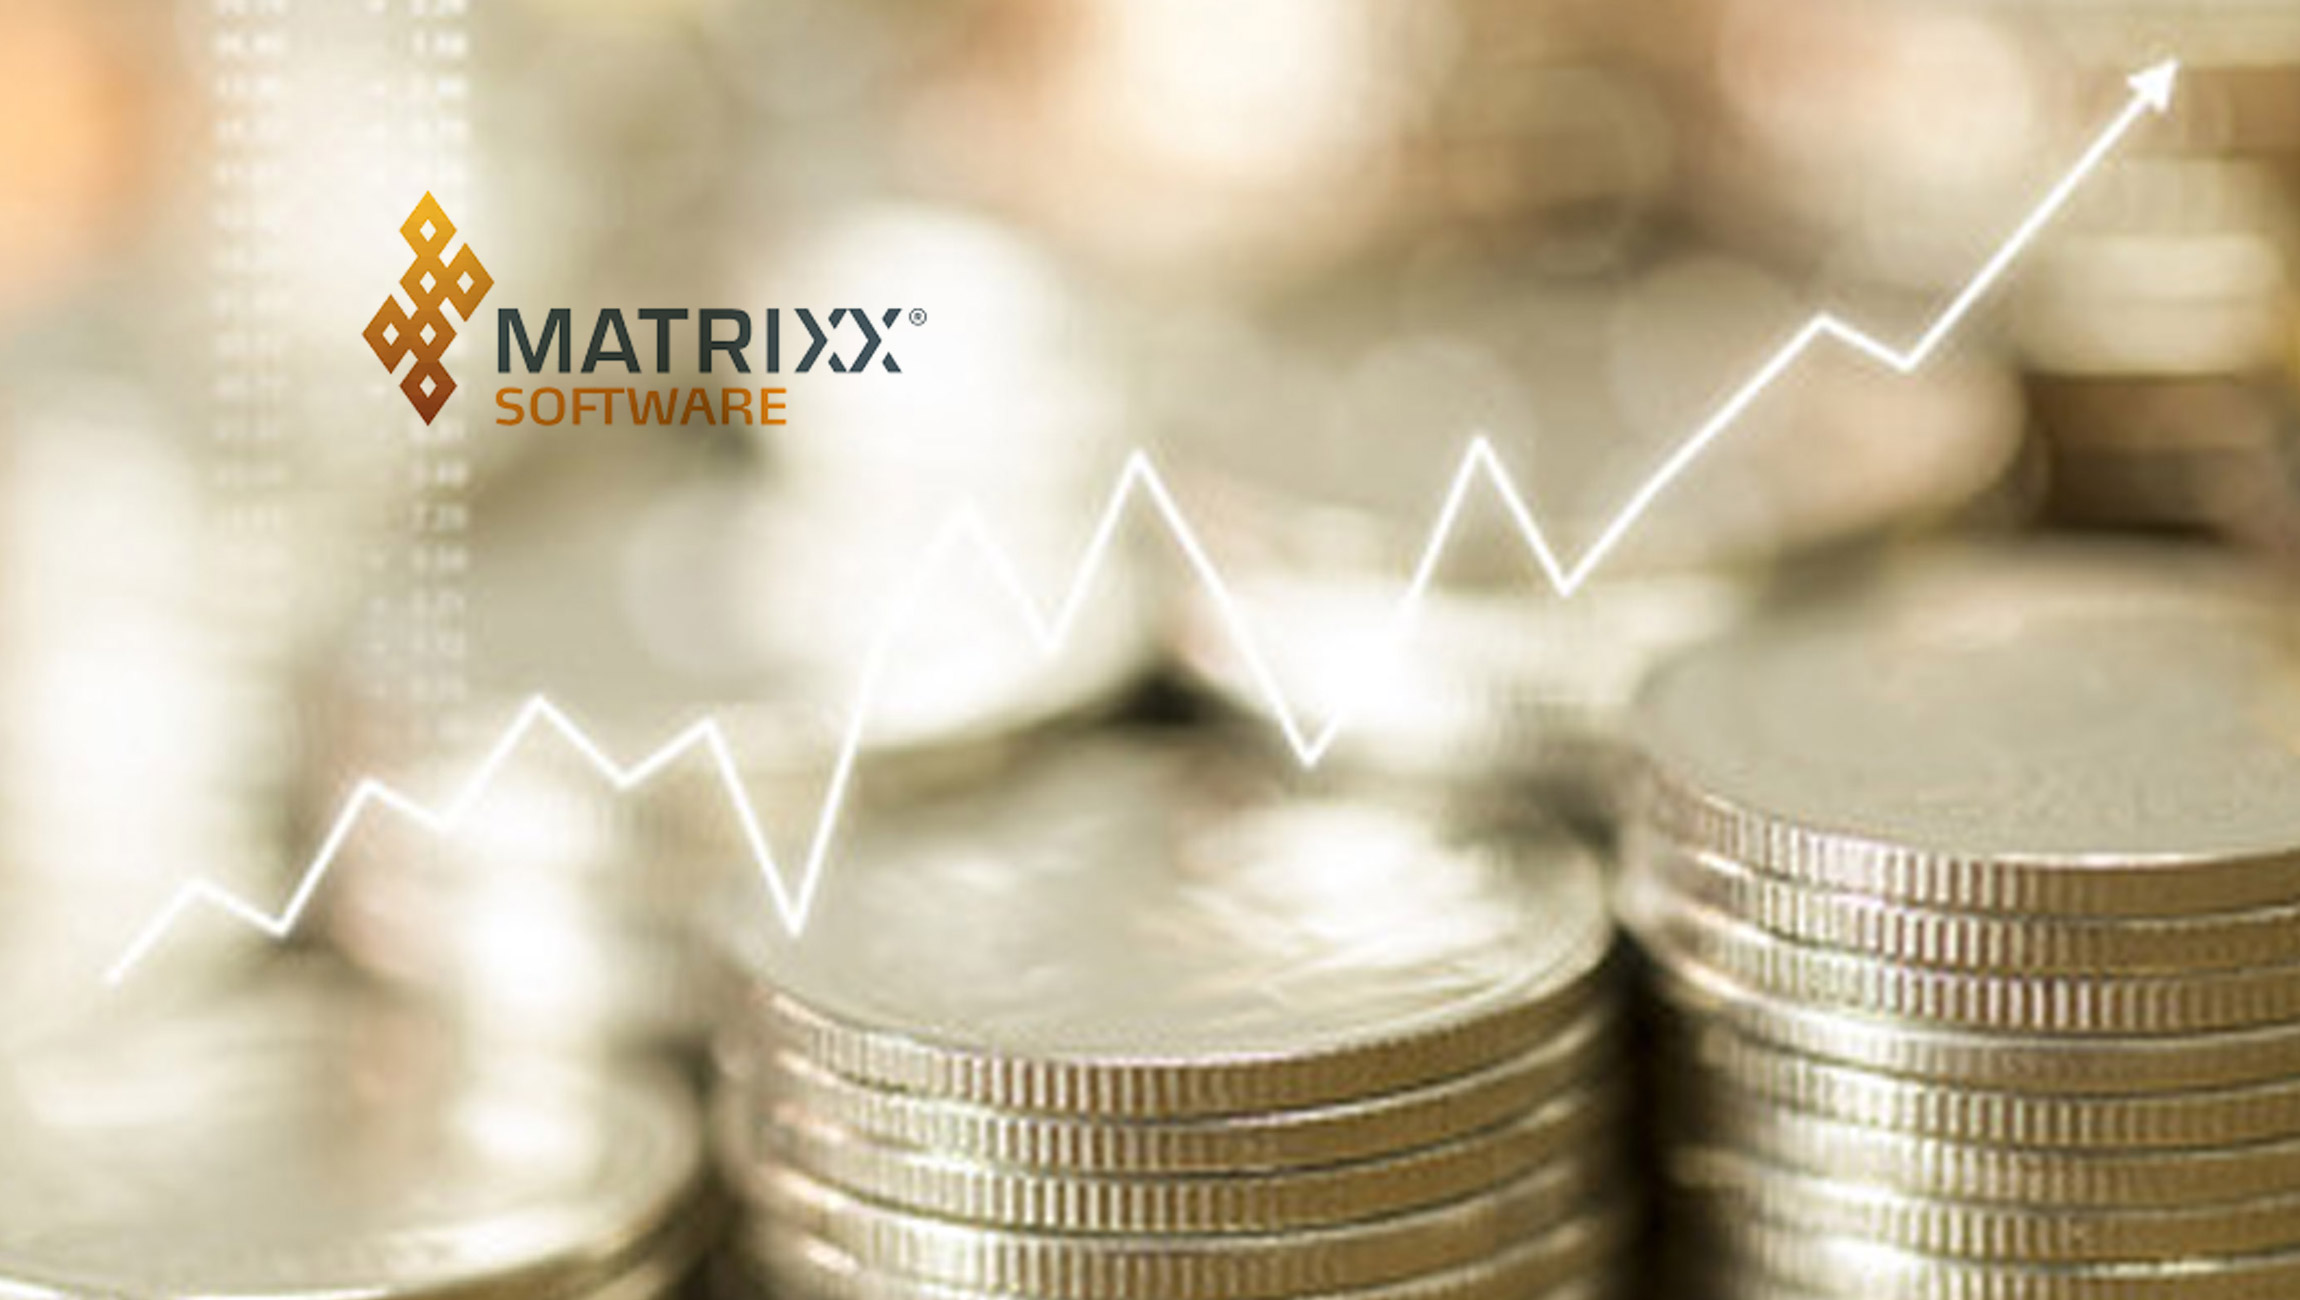 MATRIXX Software and CompaxDigital Join Forces to Drive New Revenue Growth for Emerging 5G Services